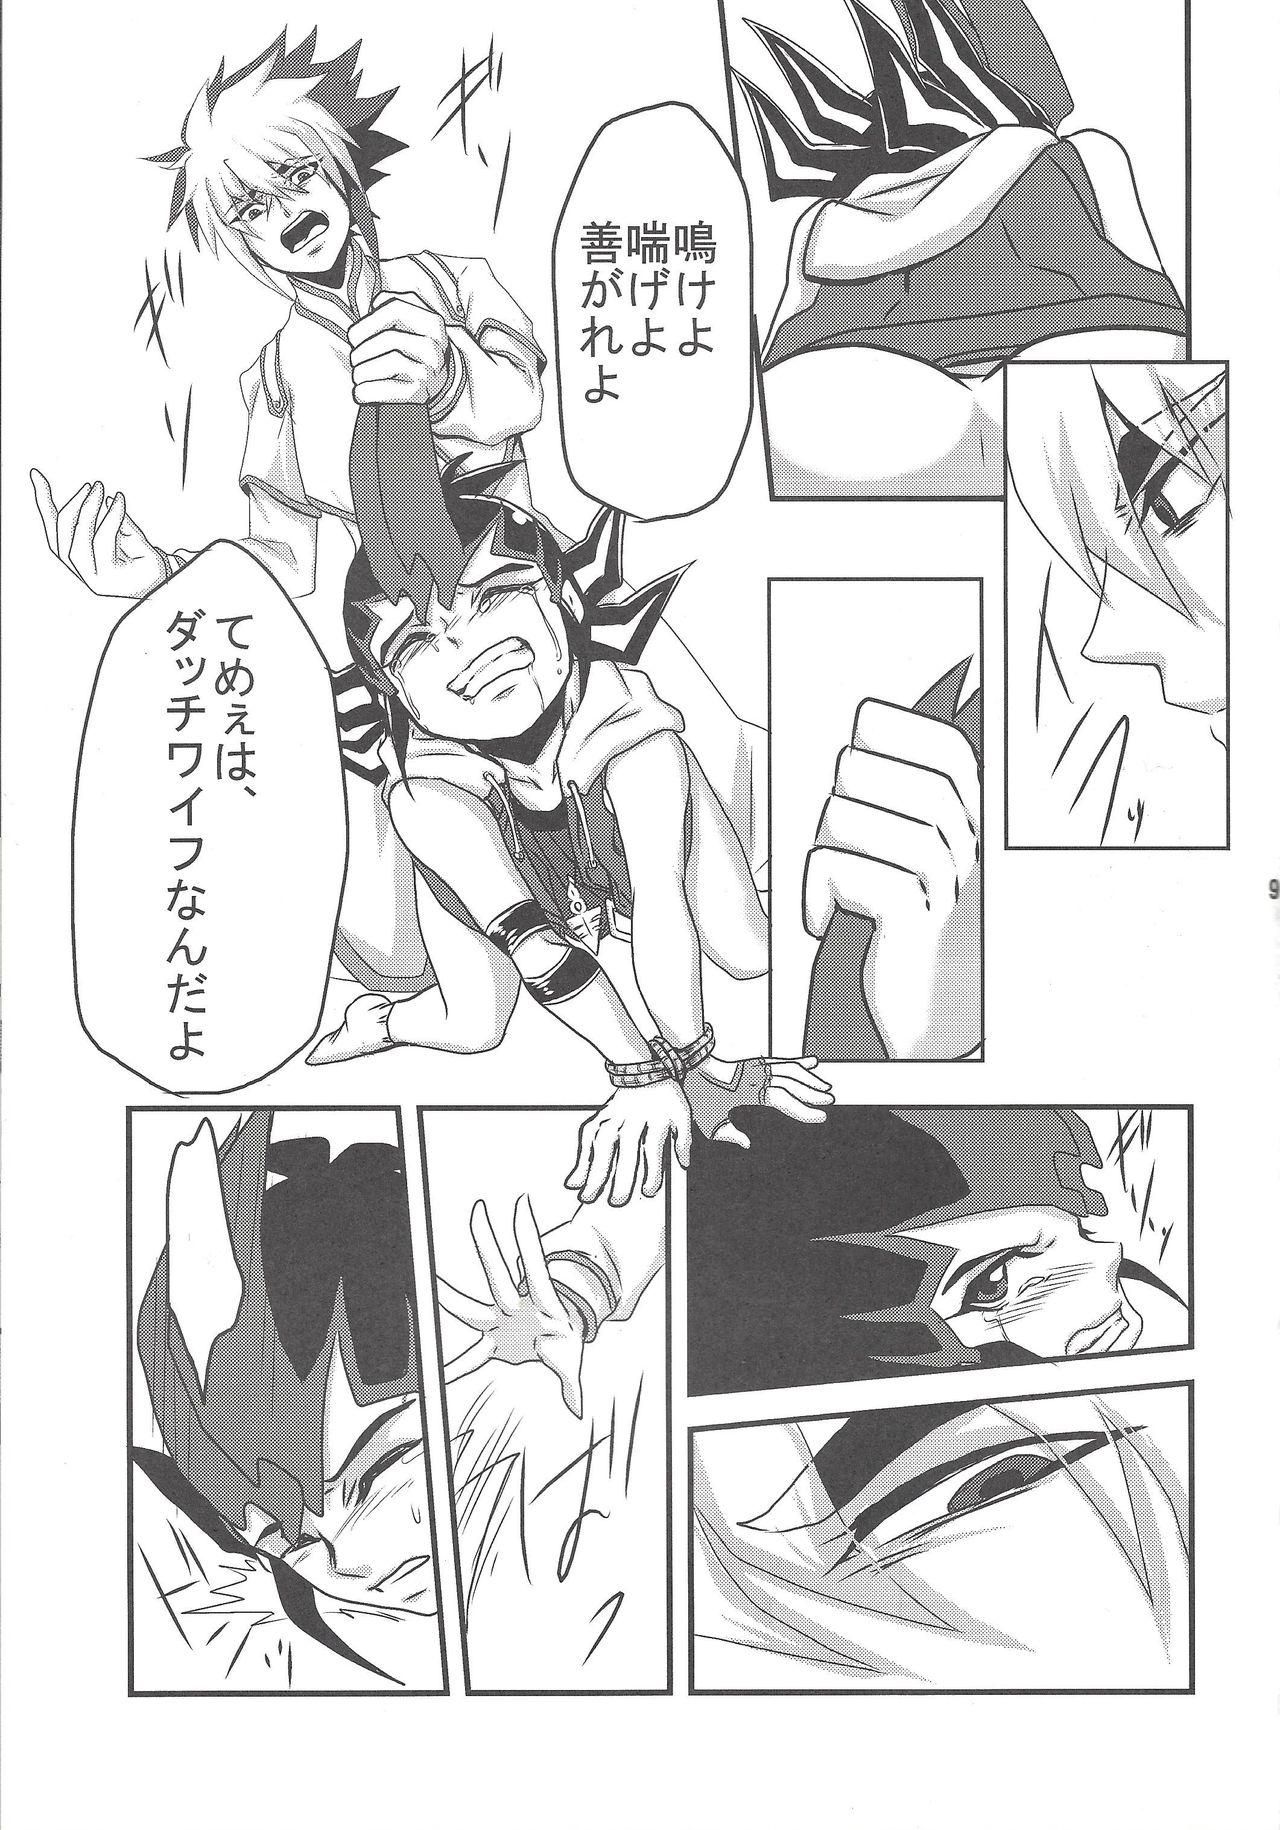 Tanned Not True Relation - Yu-gi-oh zexal Husband - Page 8